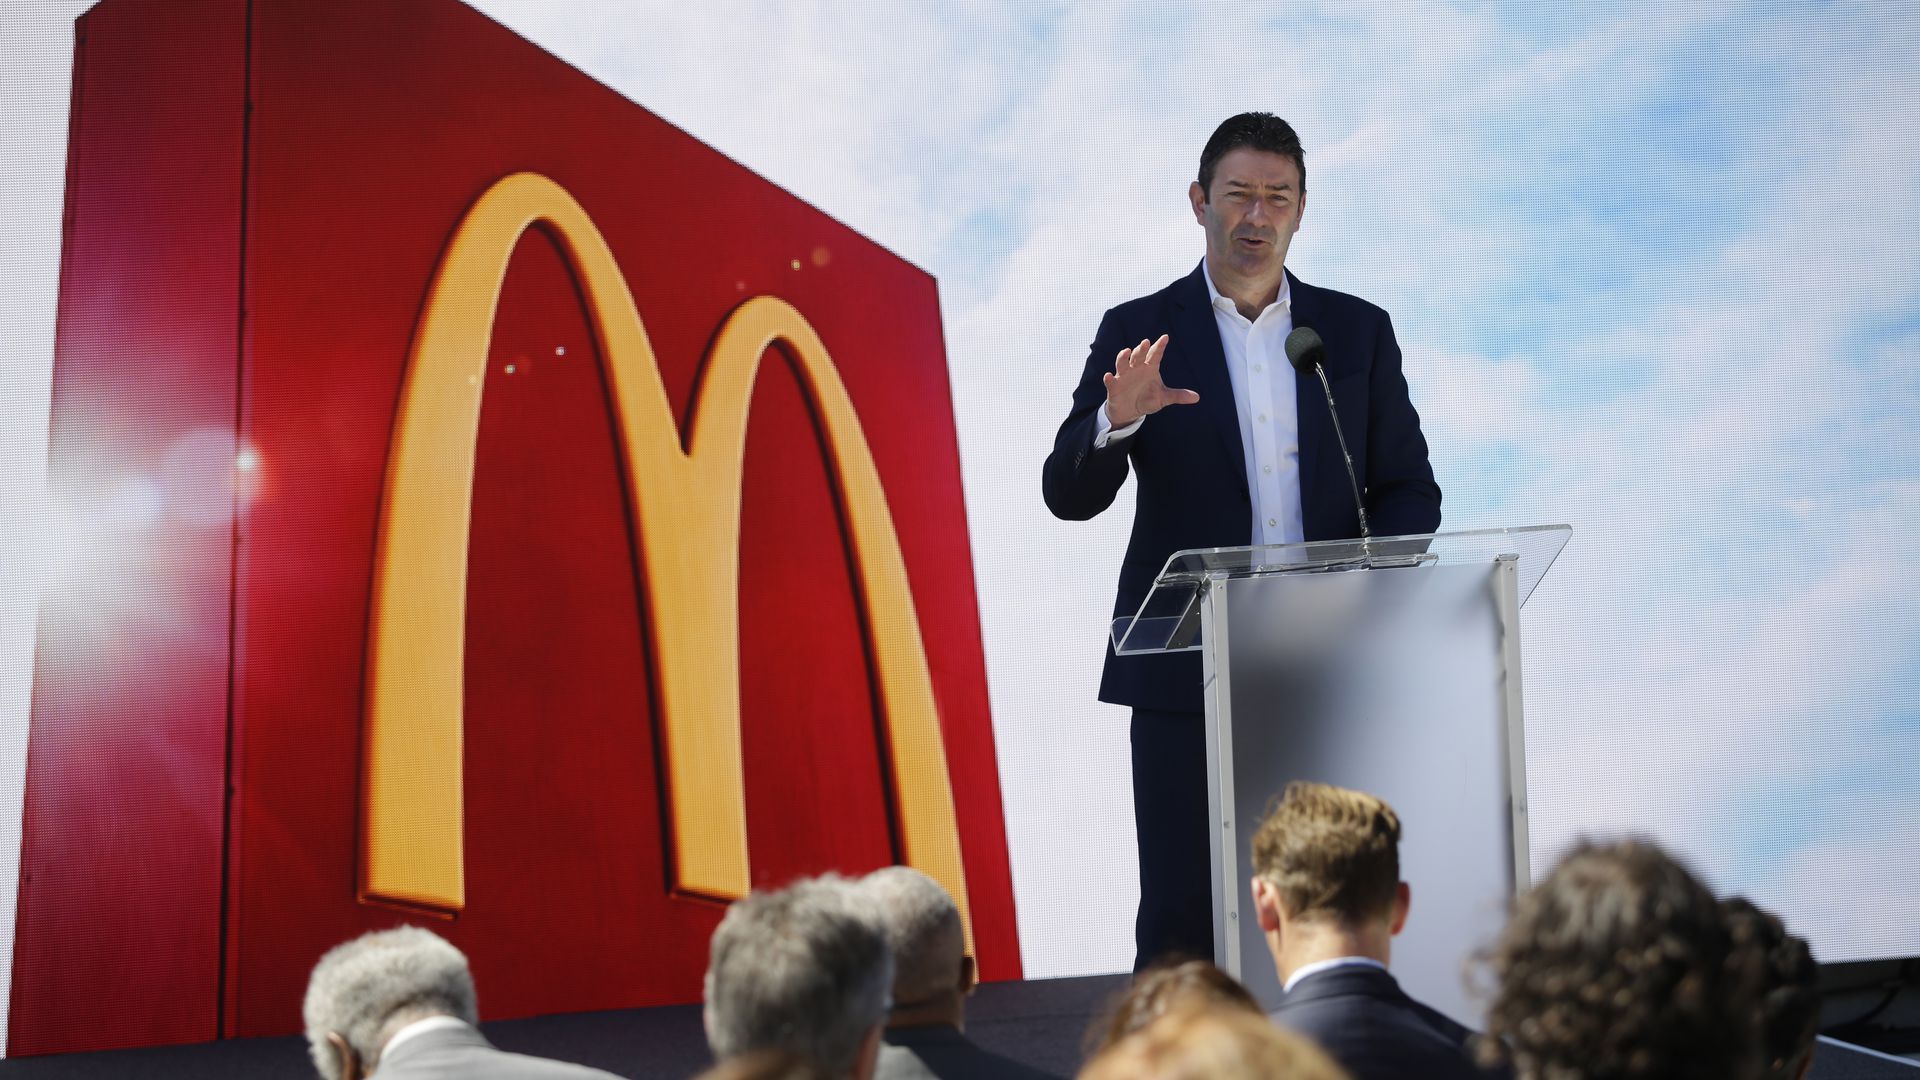 Photo of Steve Easterbrook speaking from a podium with a giant McDonald's logo behind him